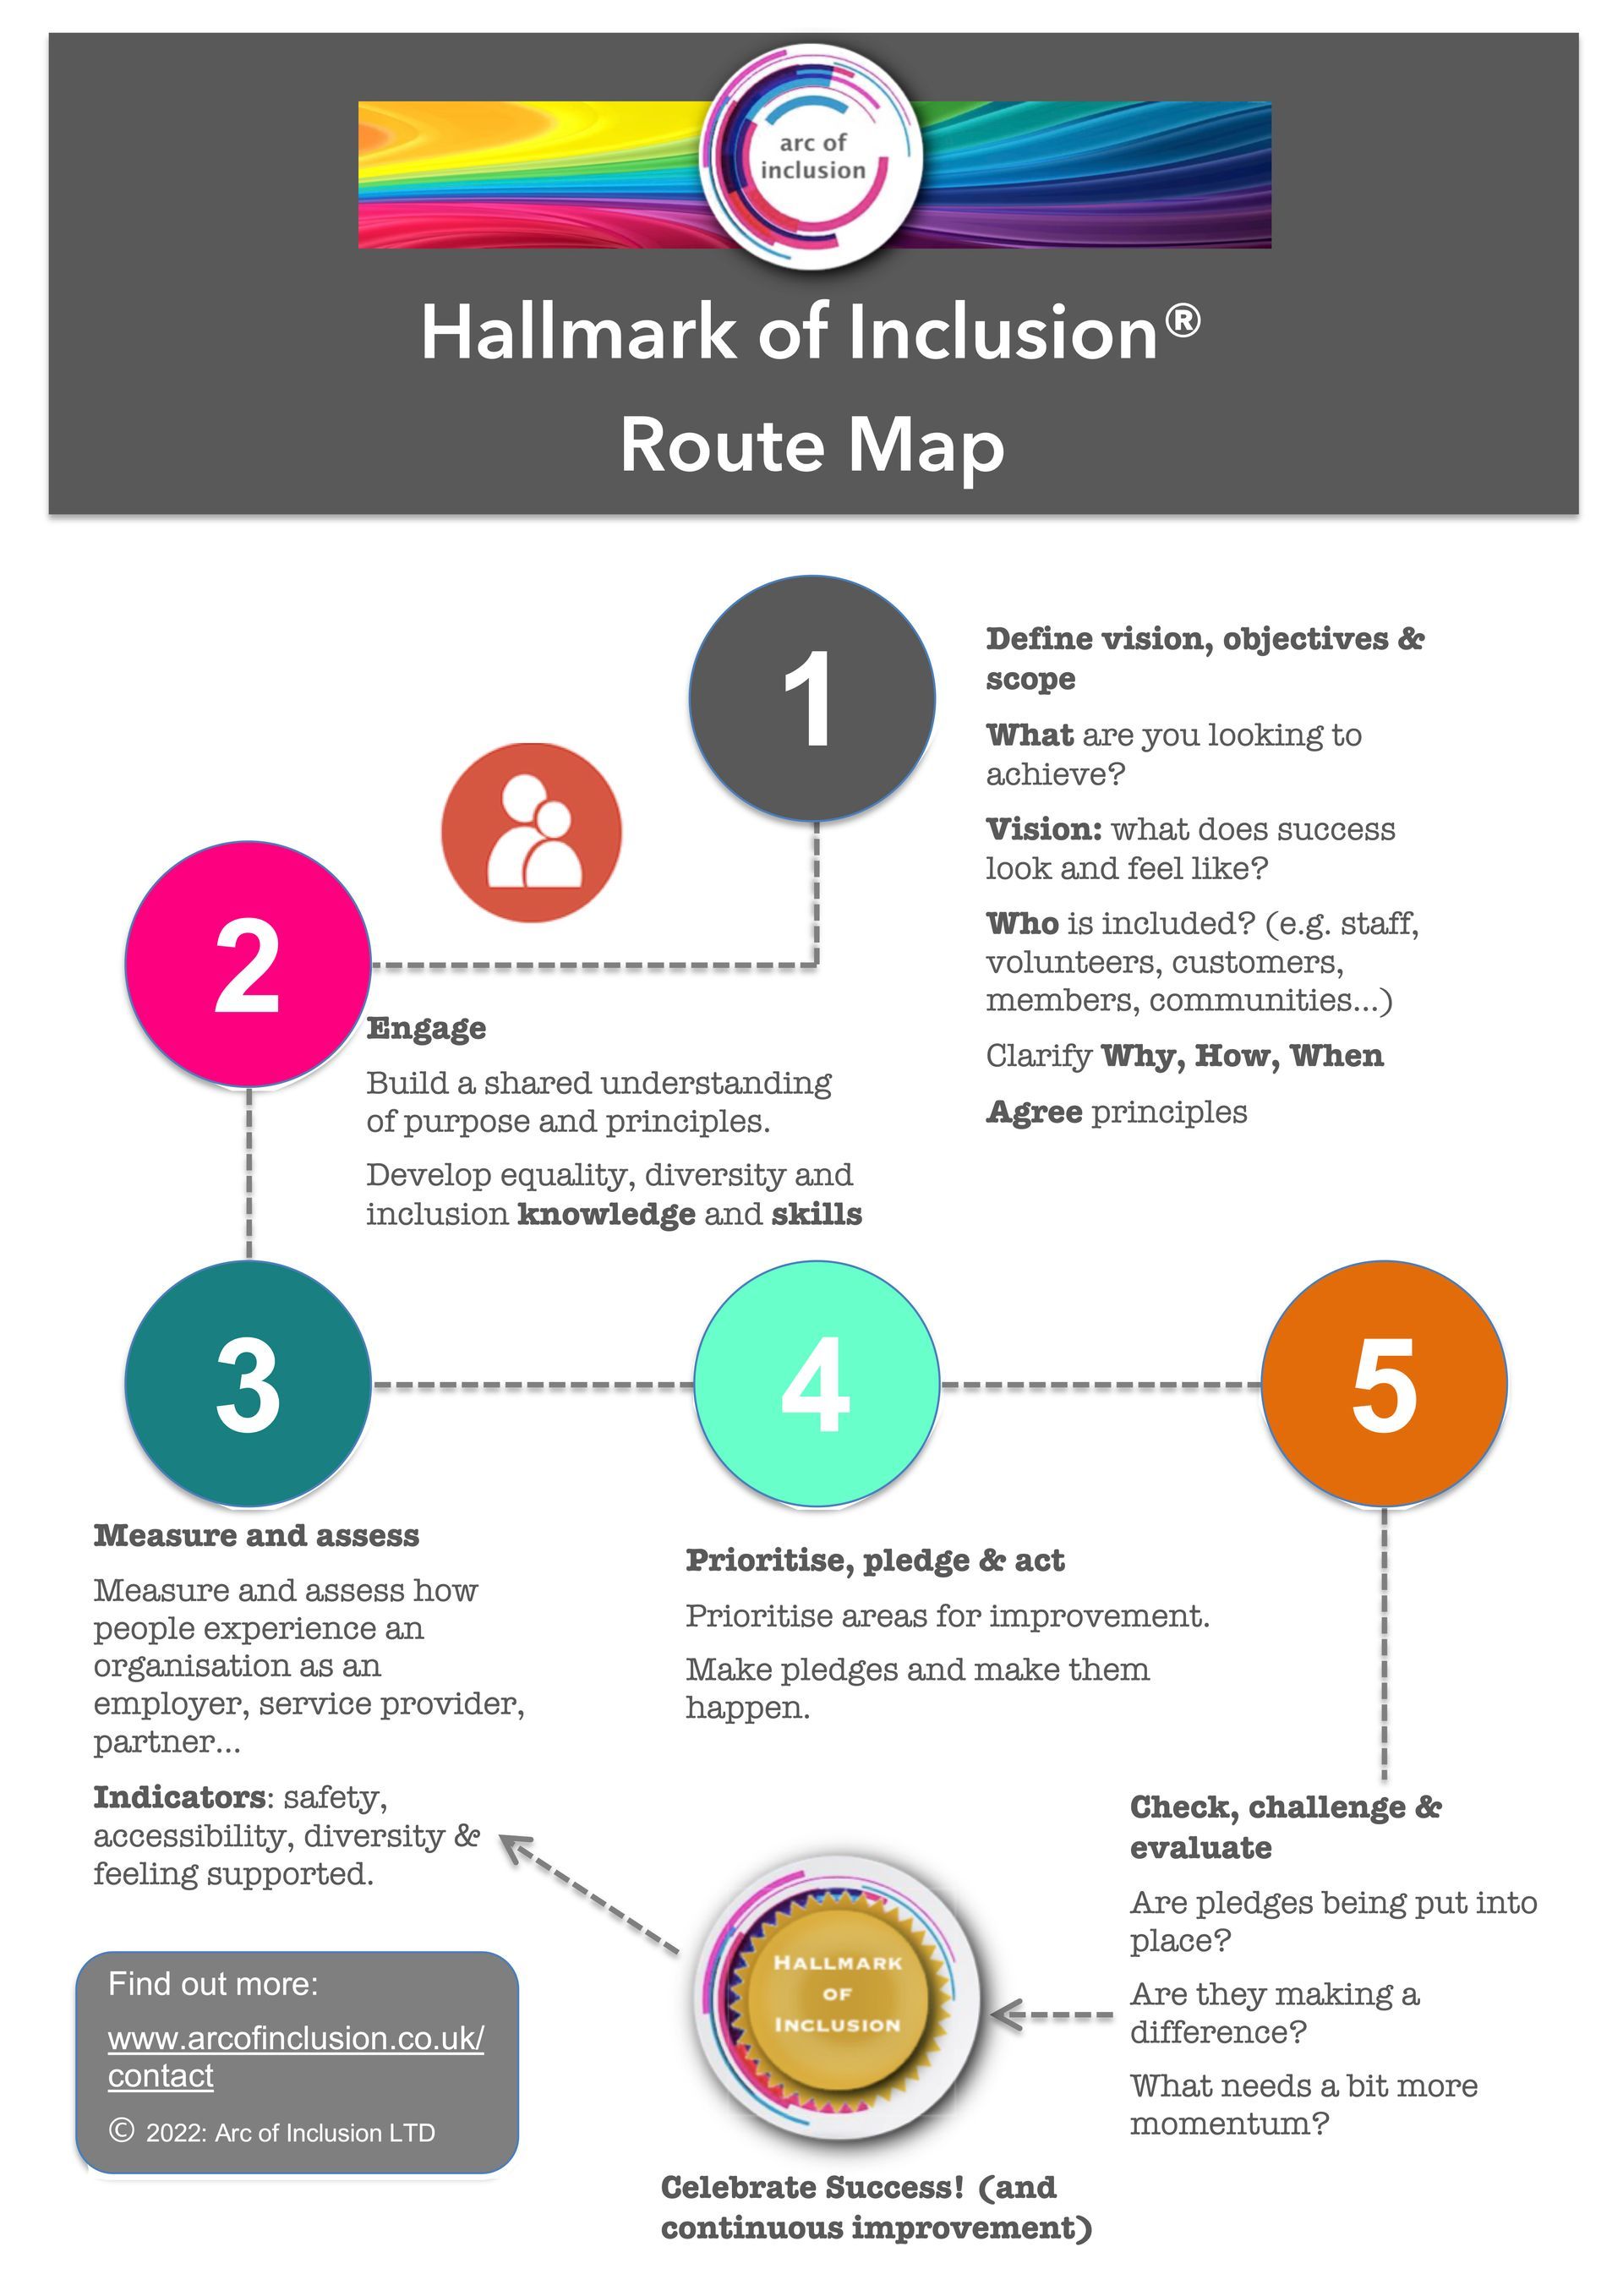 Hallmark of Inclusion Route Map - setting out 6 phases (Plain text doc available